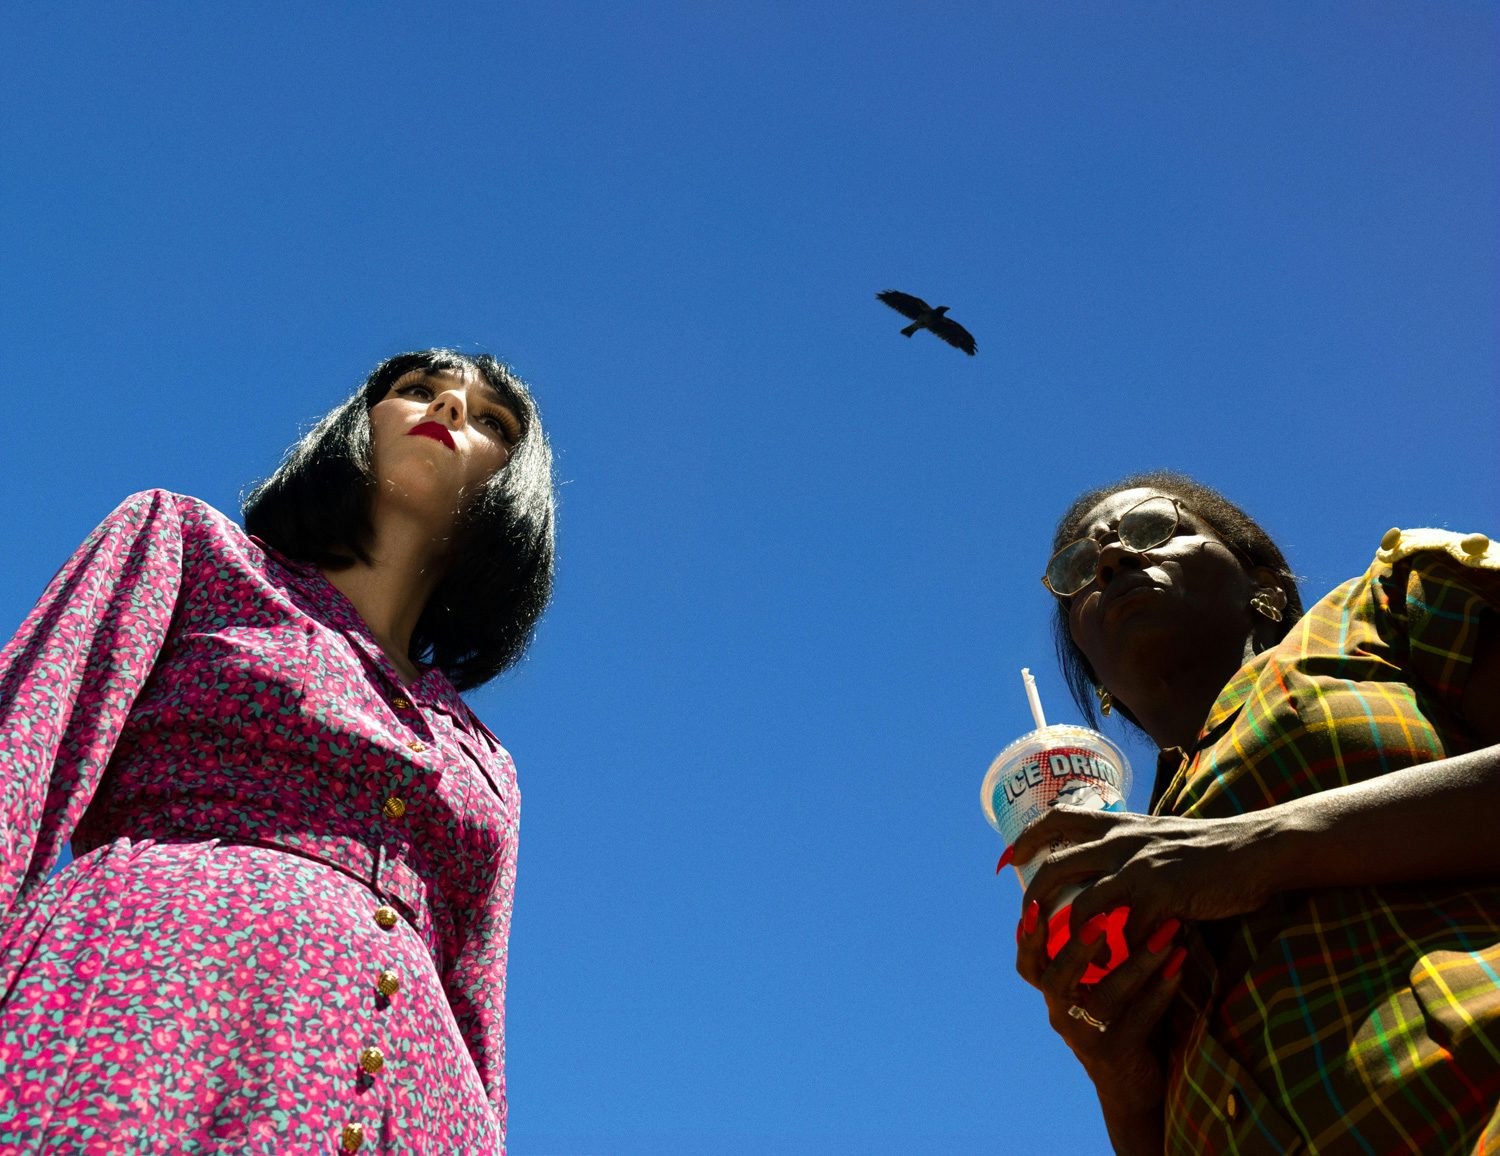 Image of Alex Prager, taken from below, with a person on the left wearing a floral button-down dress and a bob next to another person carrying a plastic drink and a straw with a bird flying over it